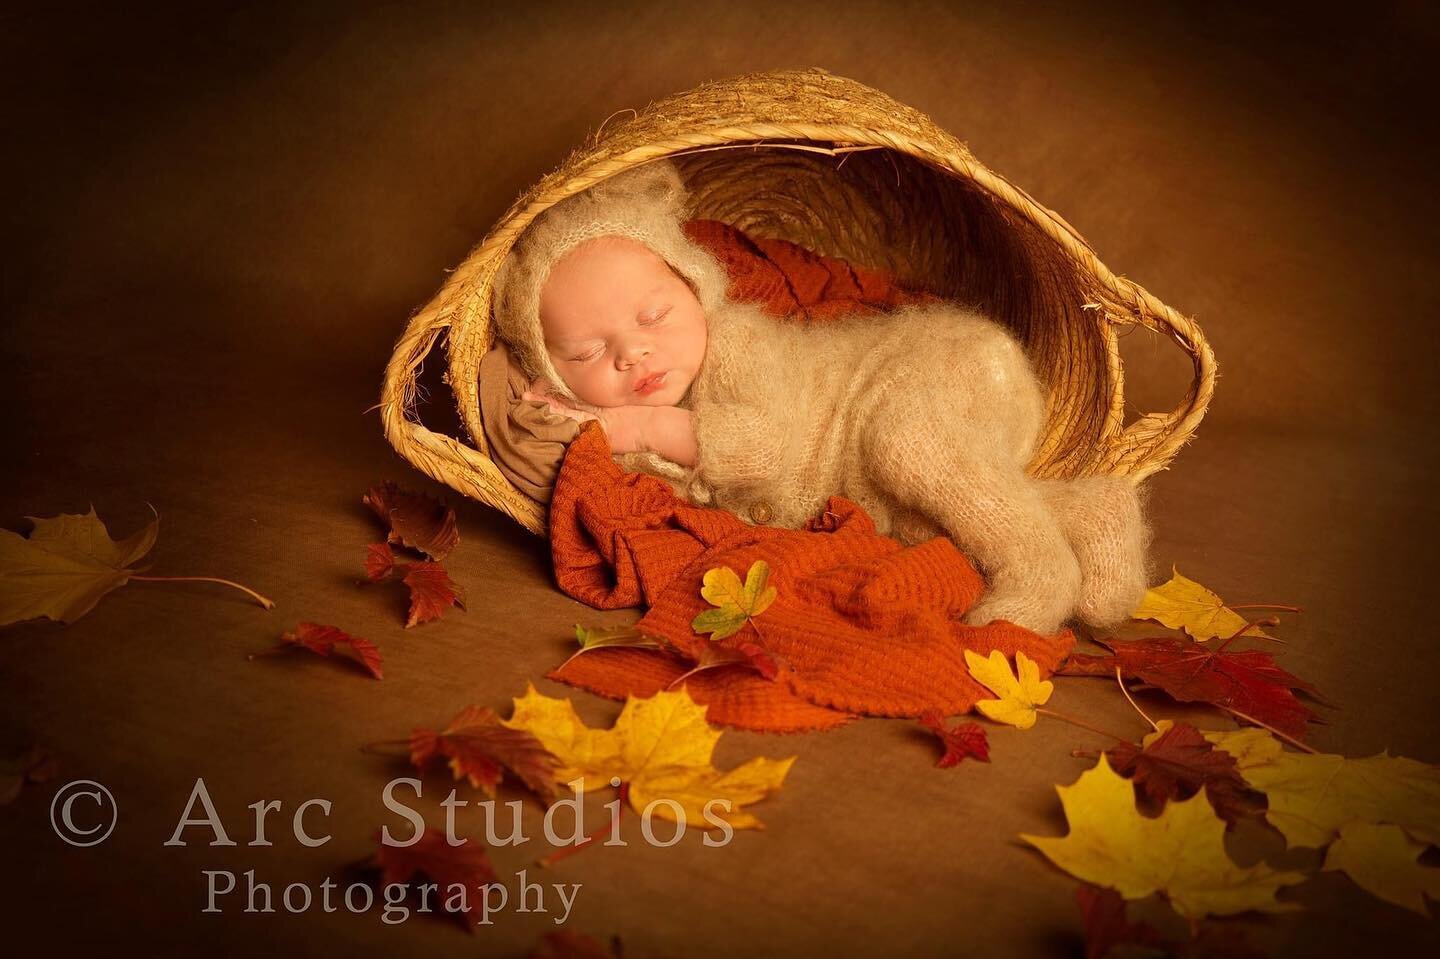 *** M O D E L  C A L L *** 

Can you help us? We are looking for newborns must be 2 weeks or under for new photos to update our website. 

For &pound;40 you will receive a full newborn studio session at our Lichfield studio, a digital image (prints u